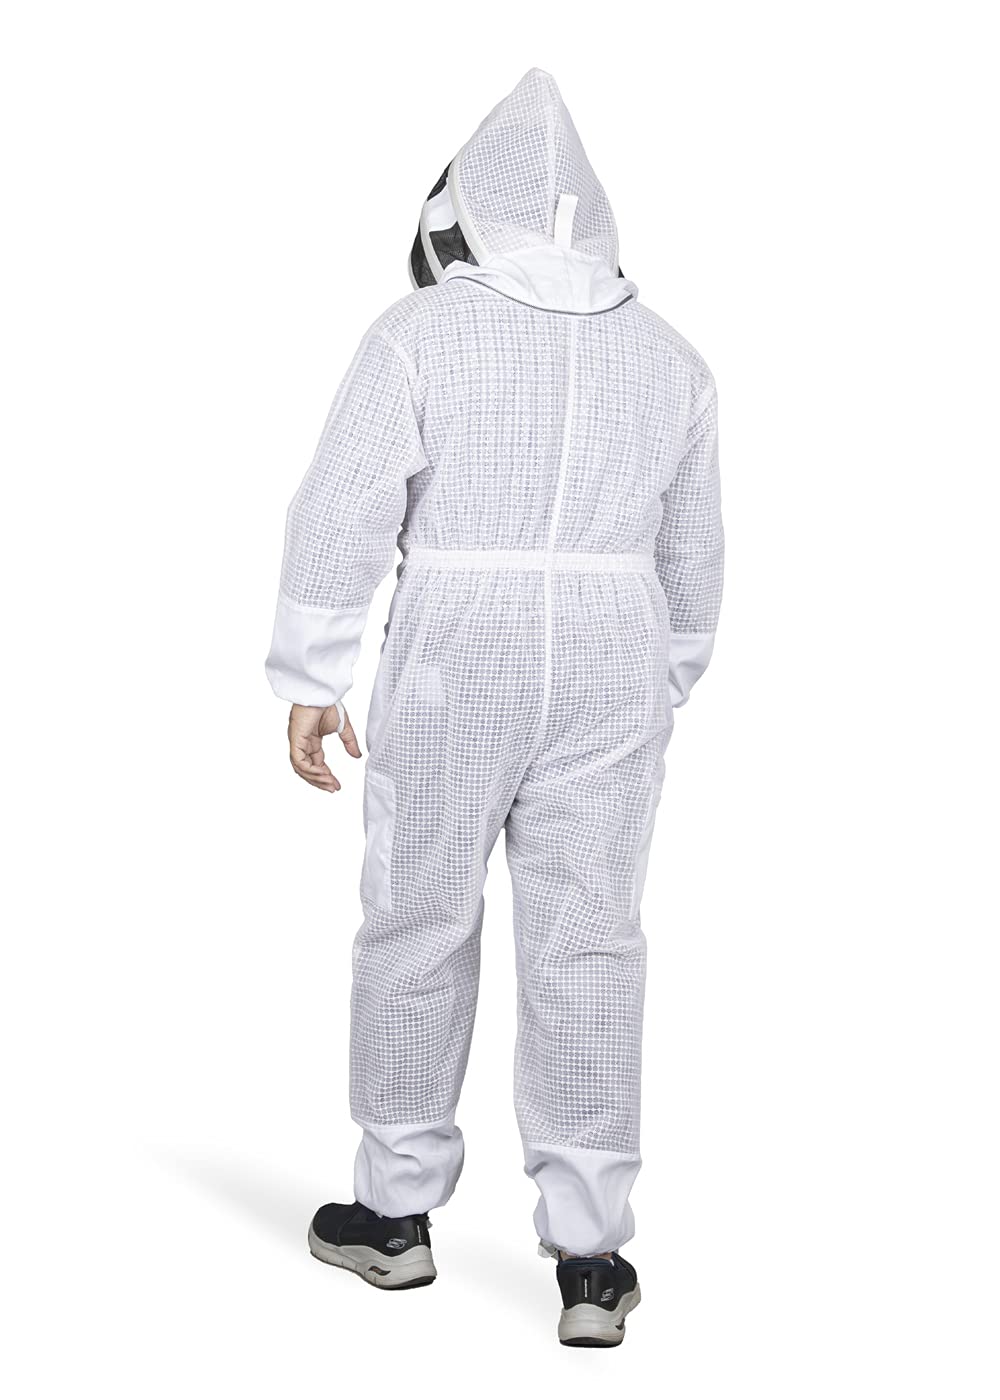 Ultra Breeze Premium 3 Layer White Mesh Beekeeping Suit with Fencing Veil